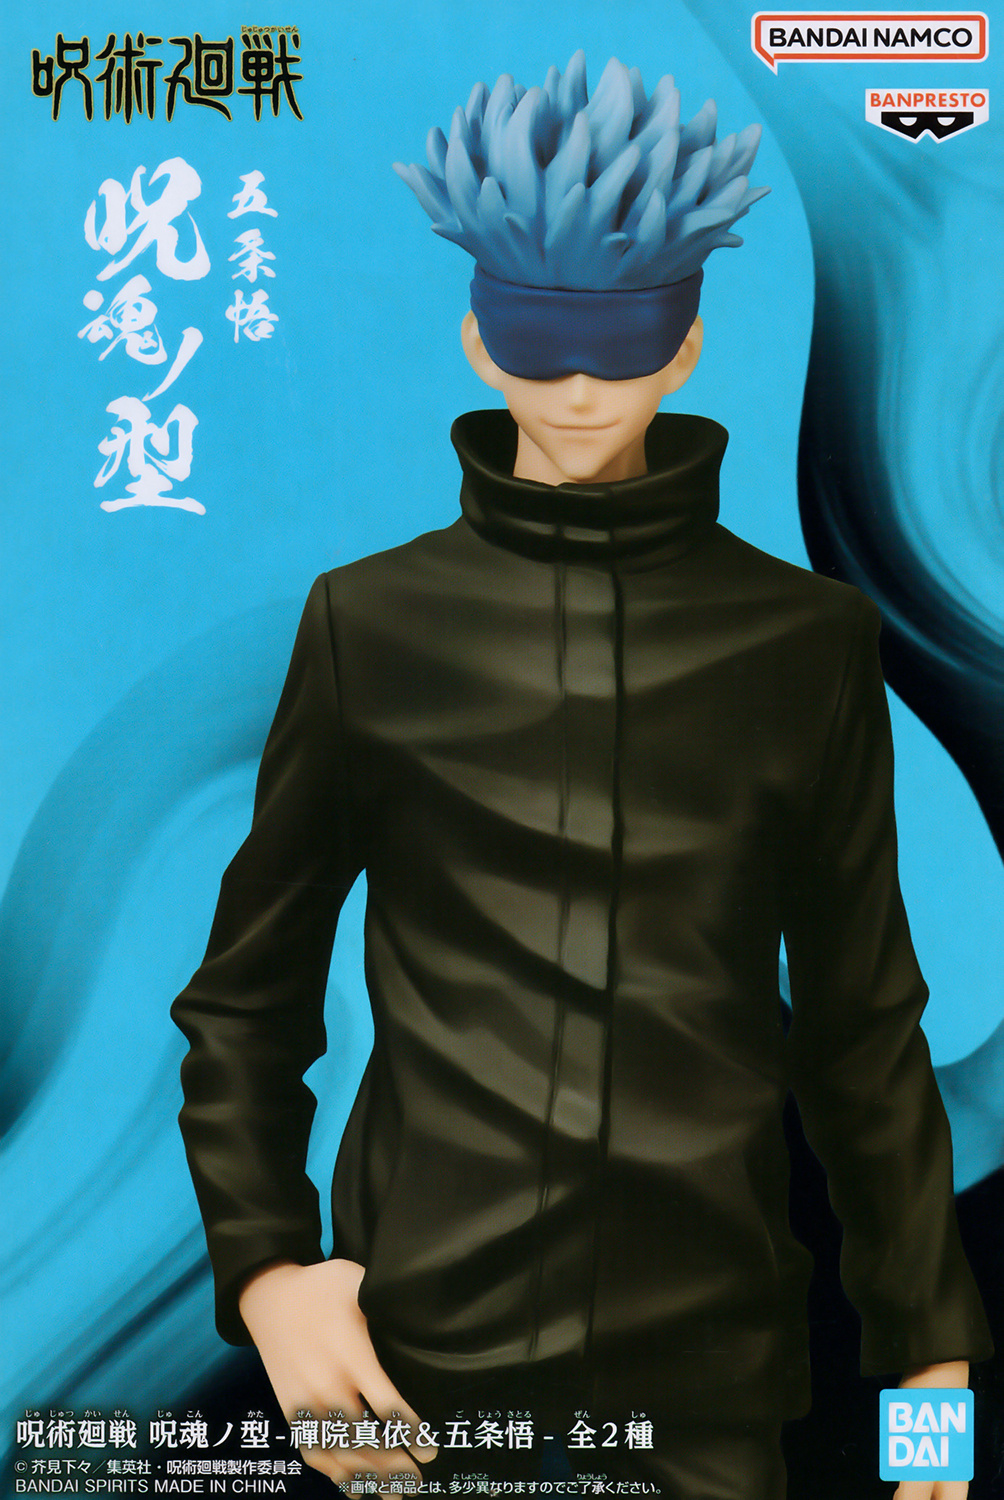 Why Does GOJO Wear A Blindfold?